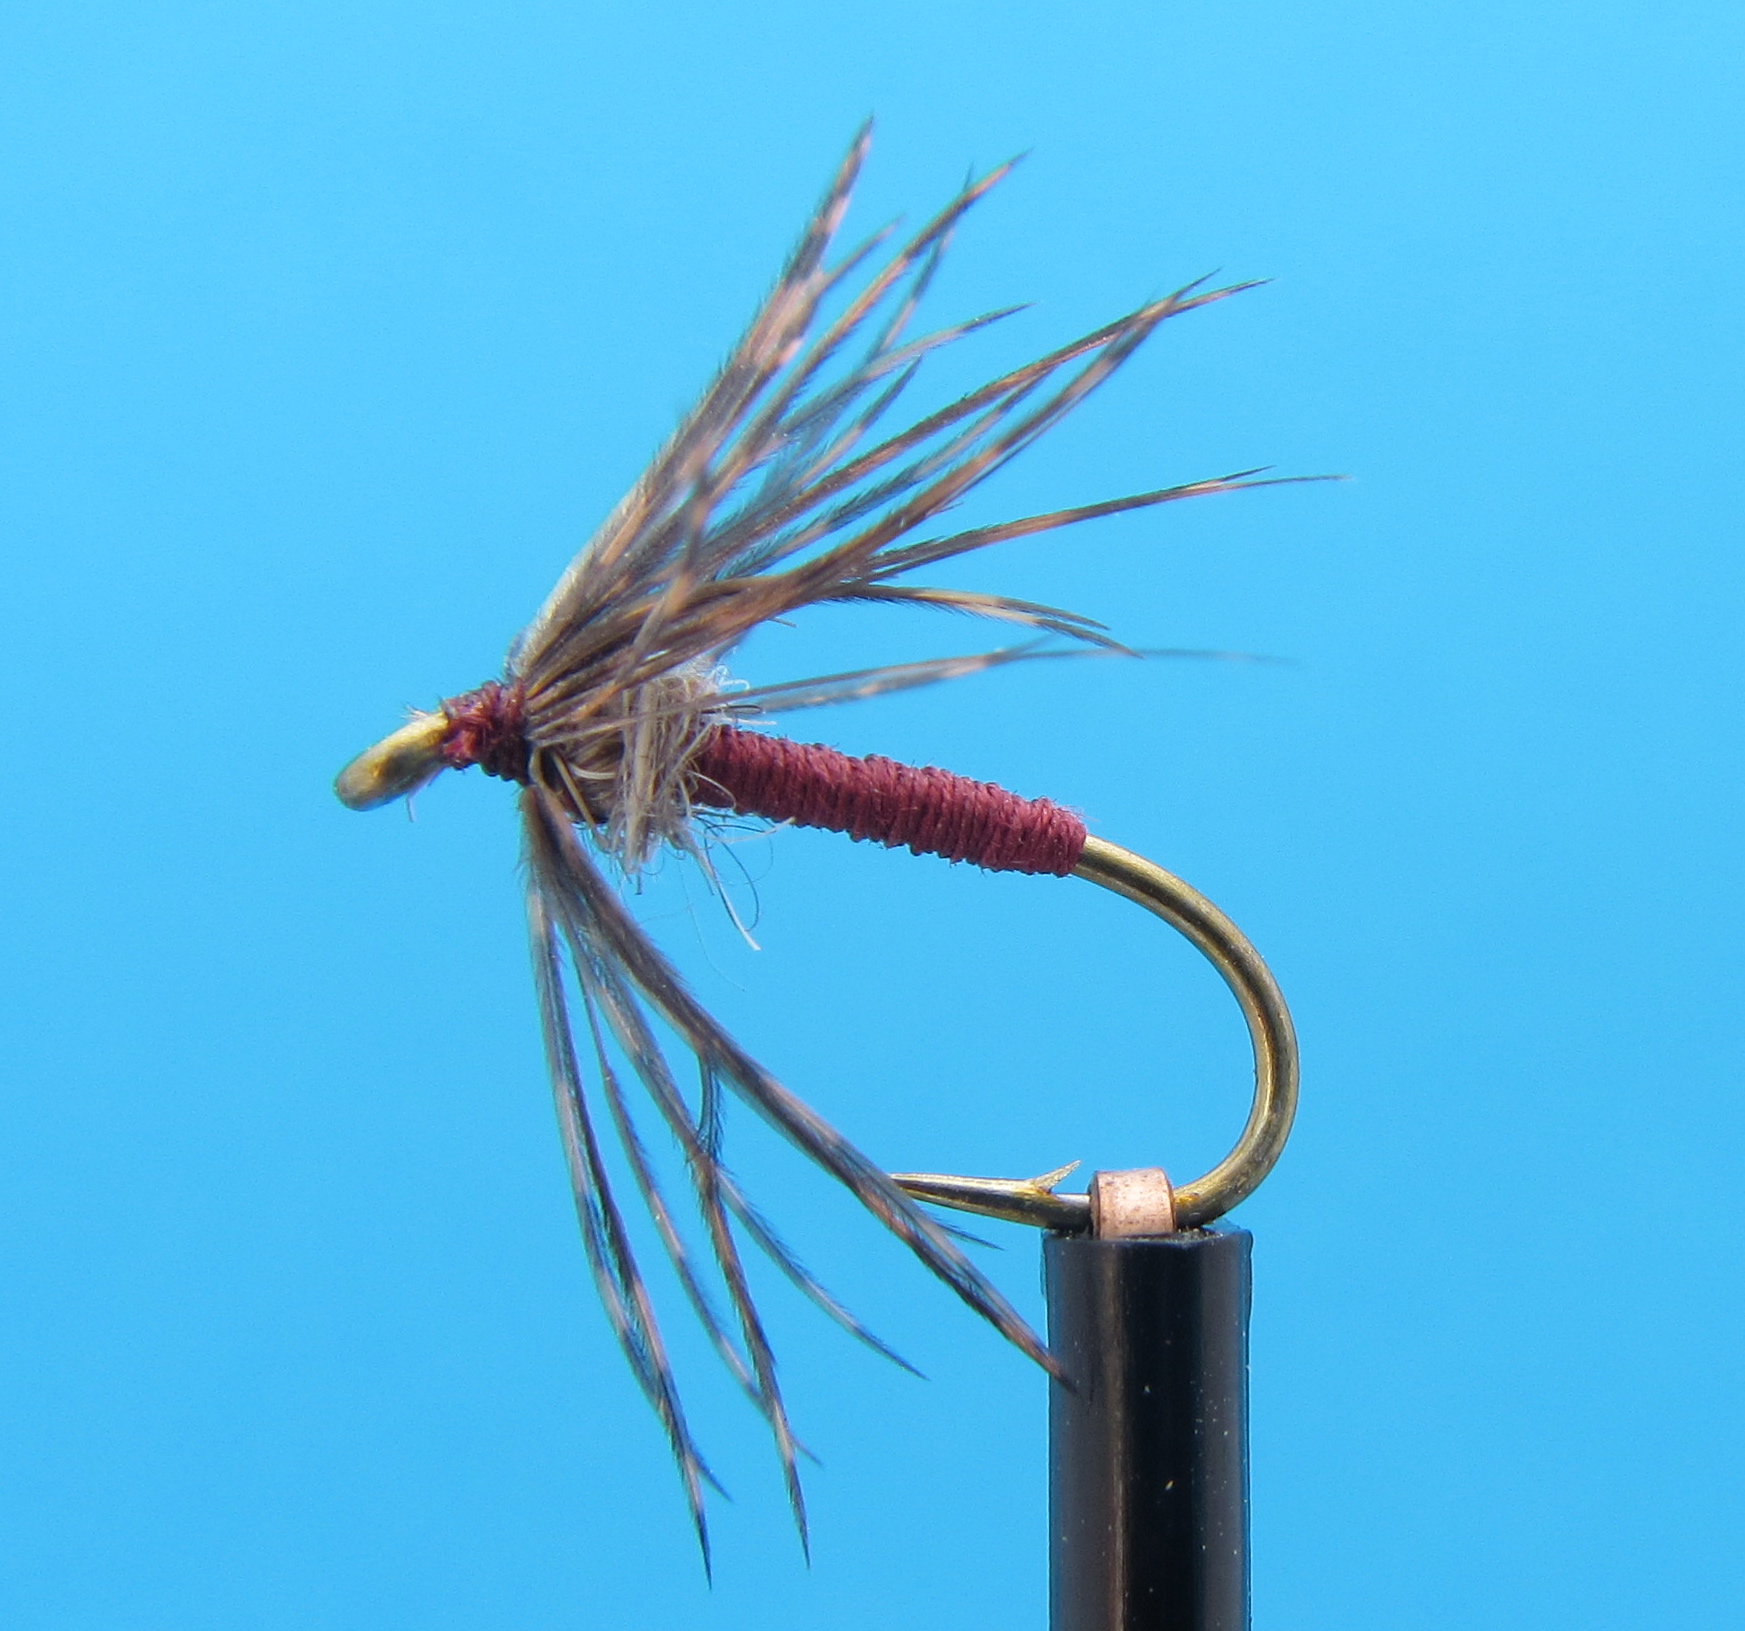 Wet Fly 101: Take the ancient and traditional path to subsurface